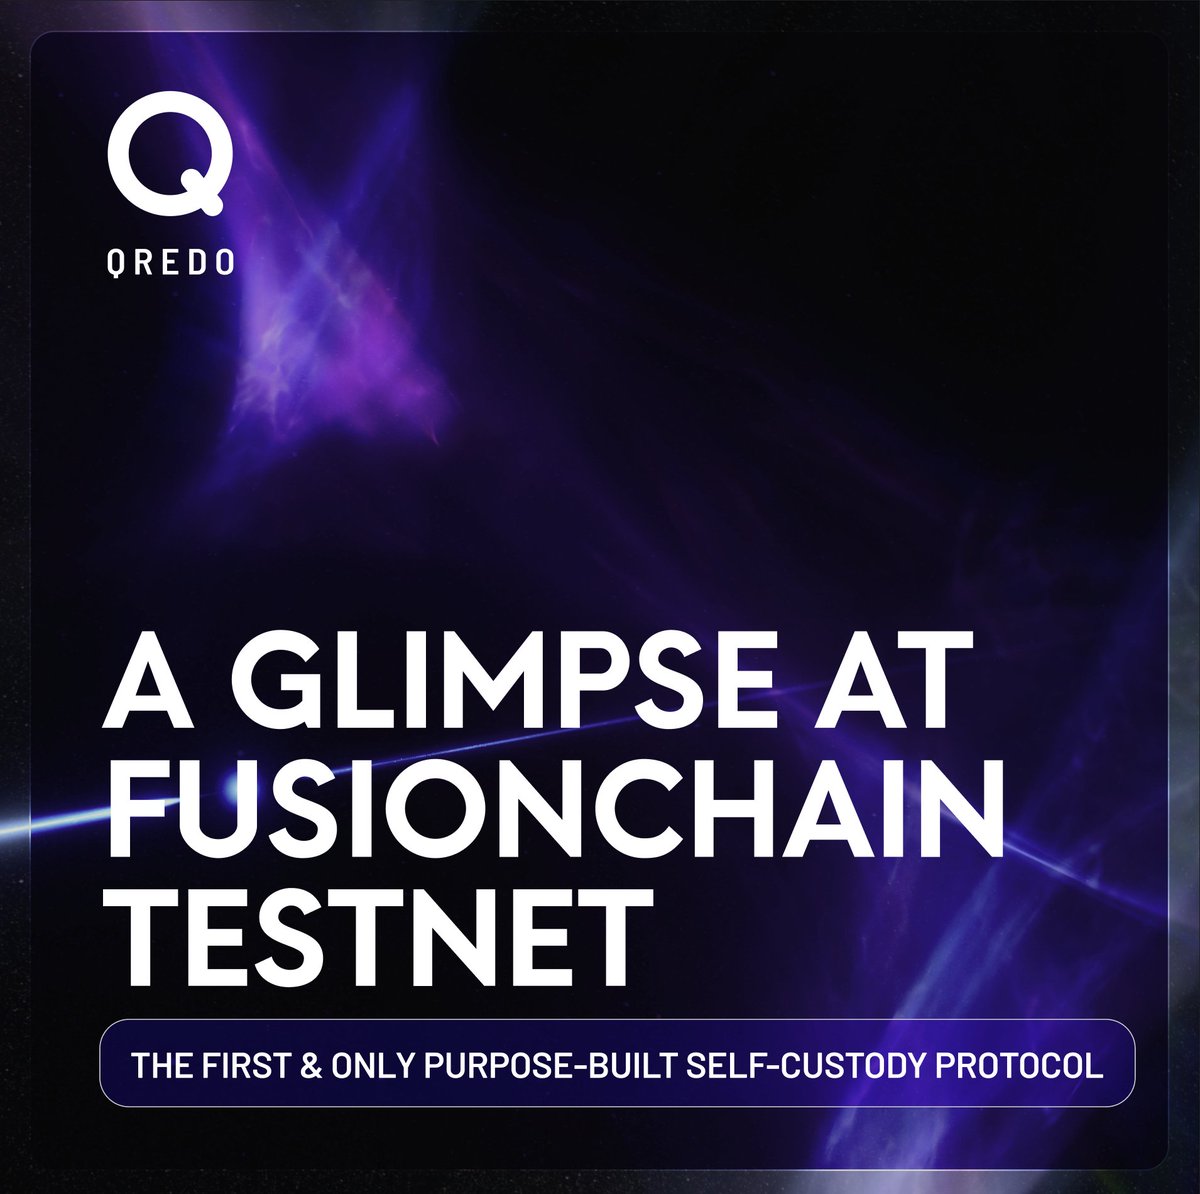 A First Glimpse at Fusionchain Testnet: 🔥A groundbreaking shift in self-custody. From challenging the status quo to embracing a decentralized future, it's a purpose-built protocol with ambitions. 👉 Read More: qre.do/fusionchaintes…